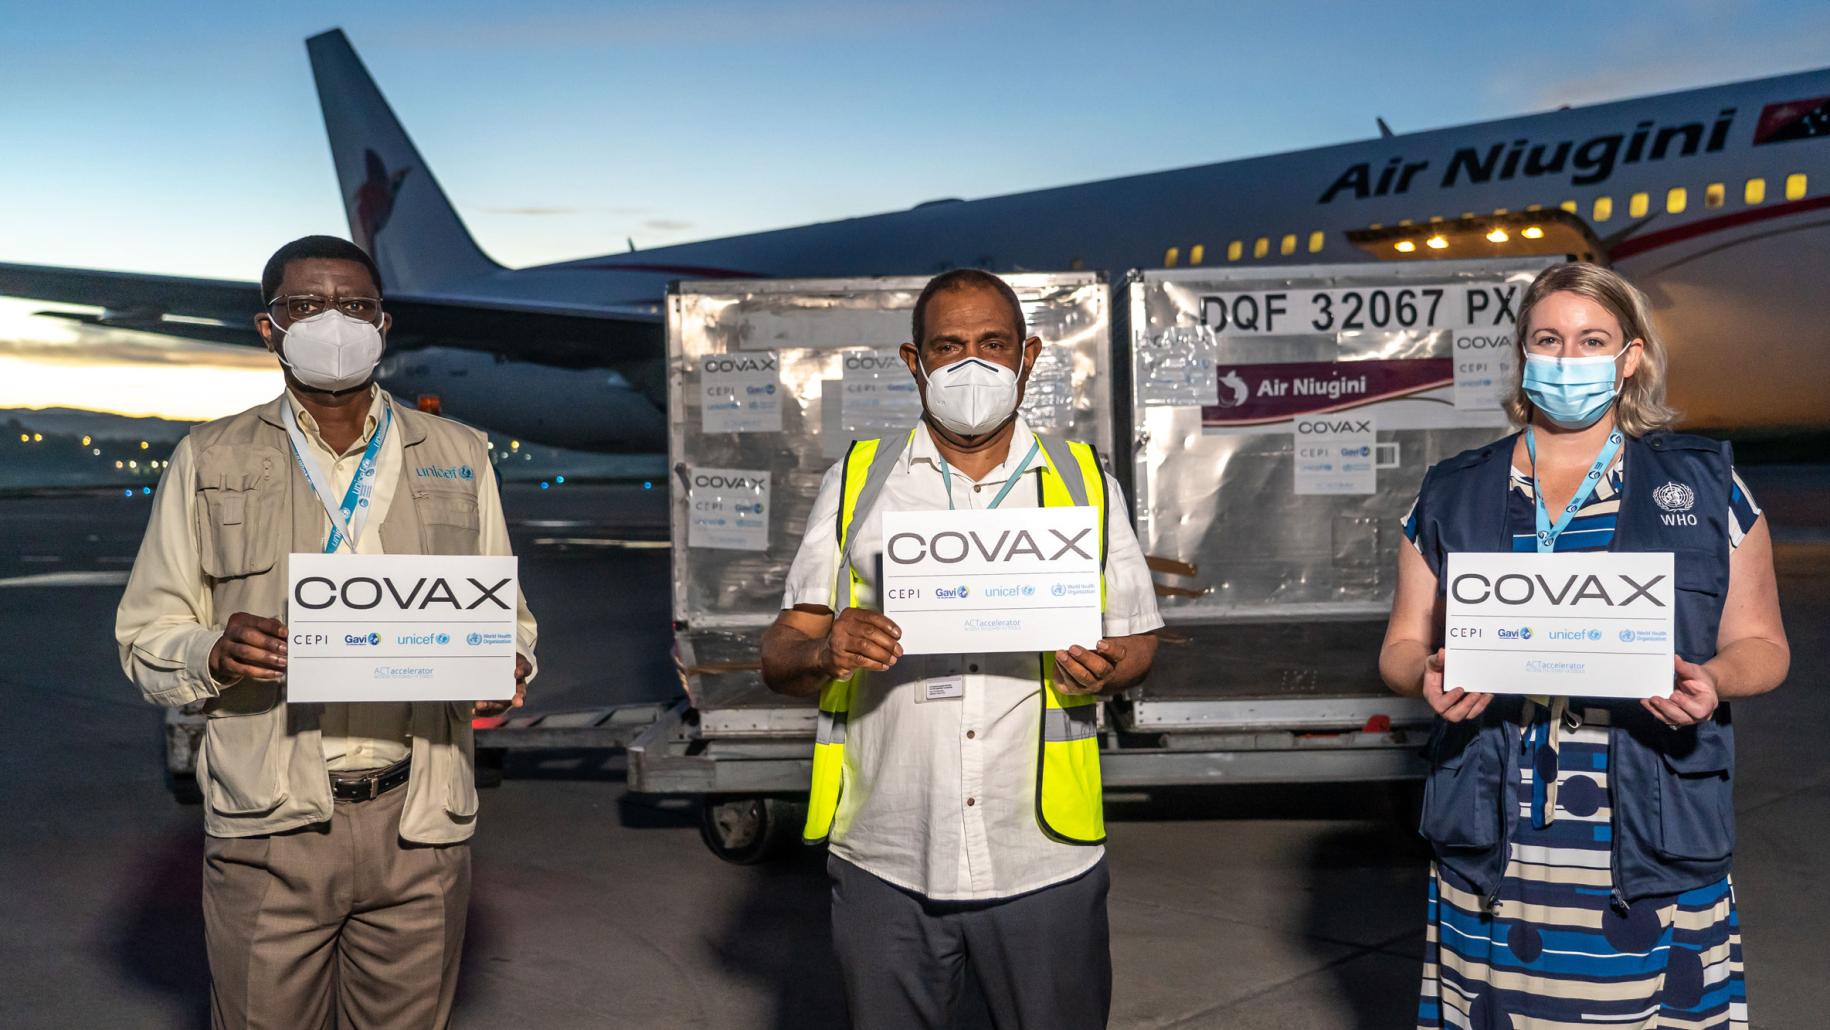 Three people in face masks hold COVAX signs stand in front of a delivery of the COVID-19 vaccines and an airplane.